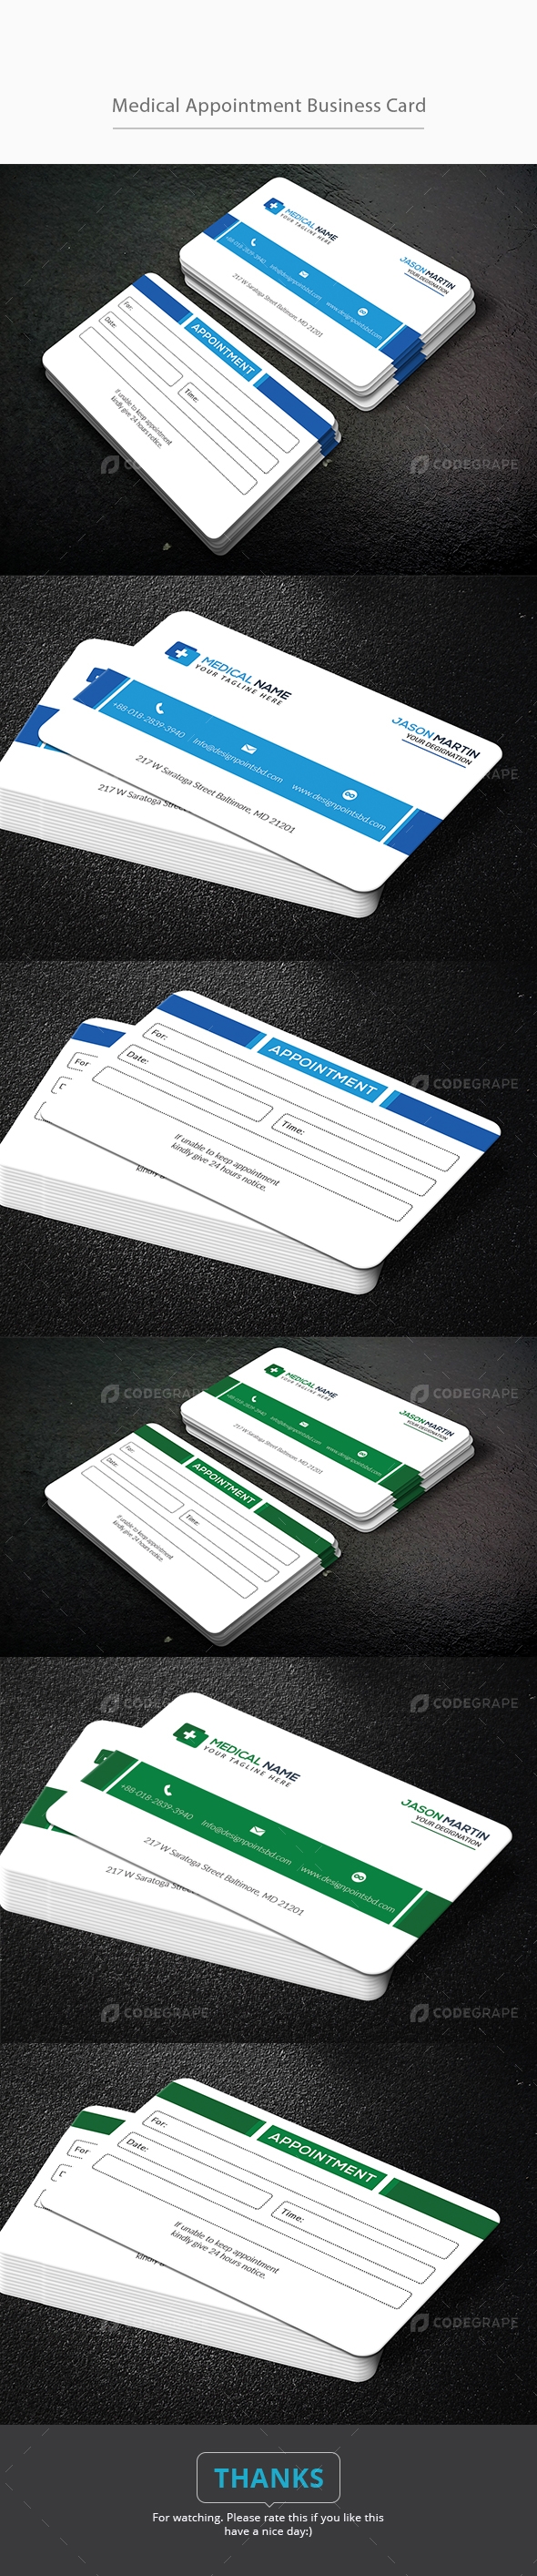 Medical Appointment Business Card